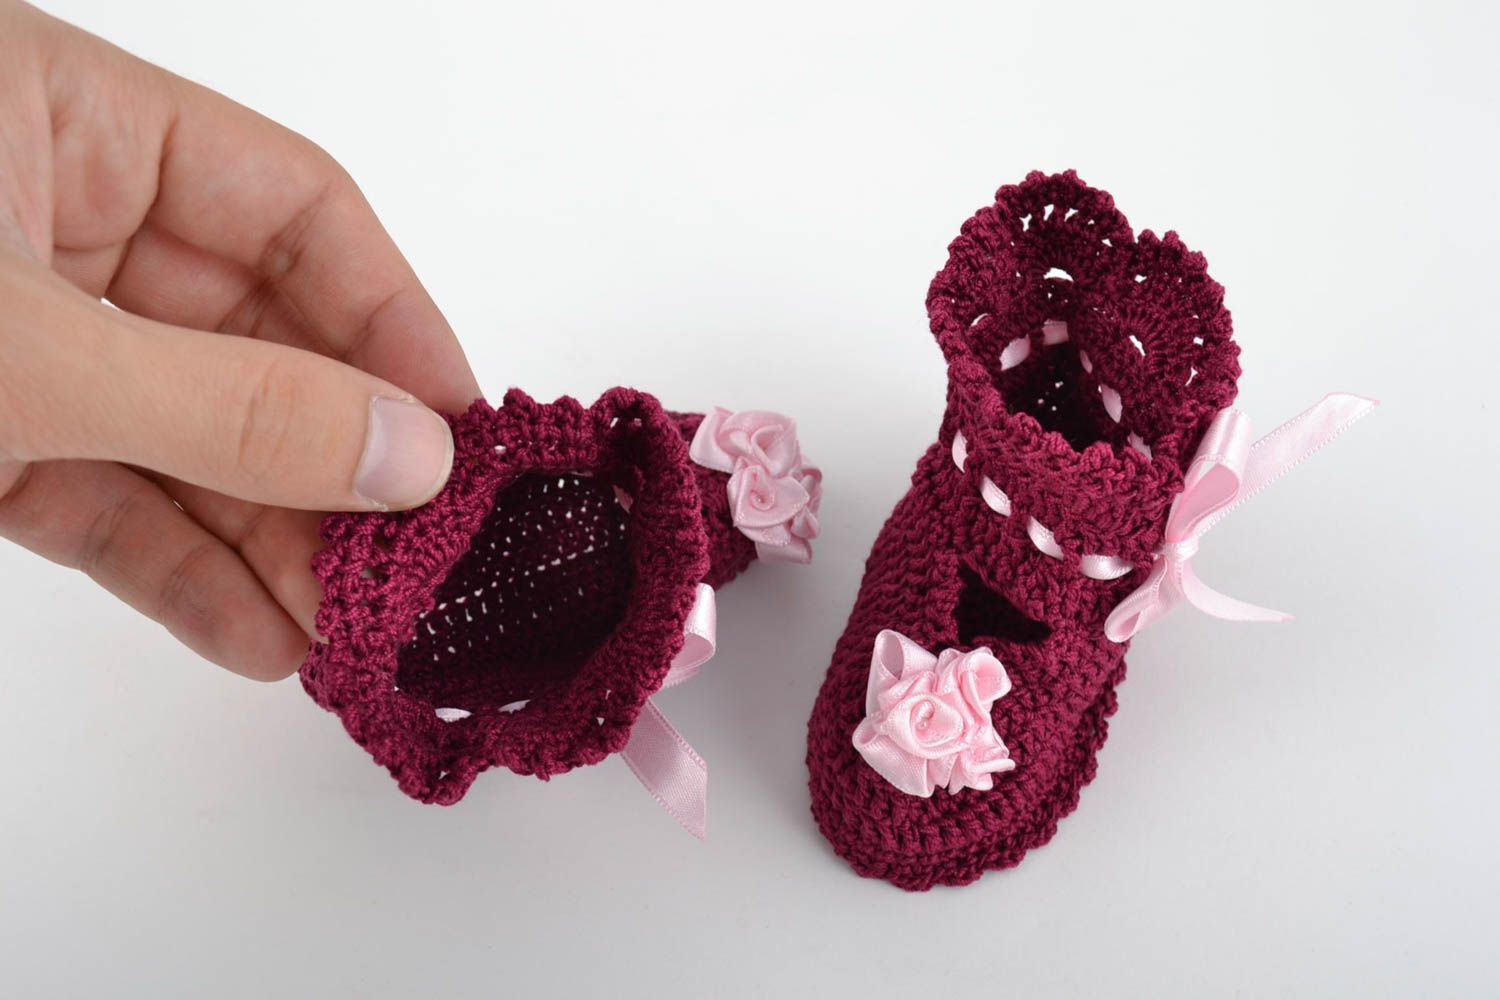 Handmade crocheted lacy baby booties of purple color with pink satin ribbons photo 5